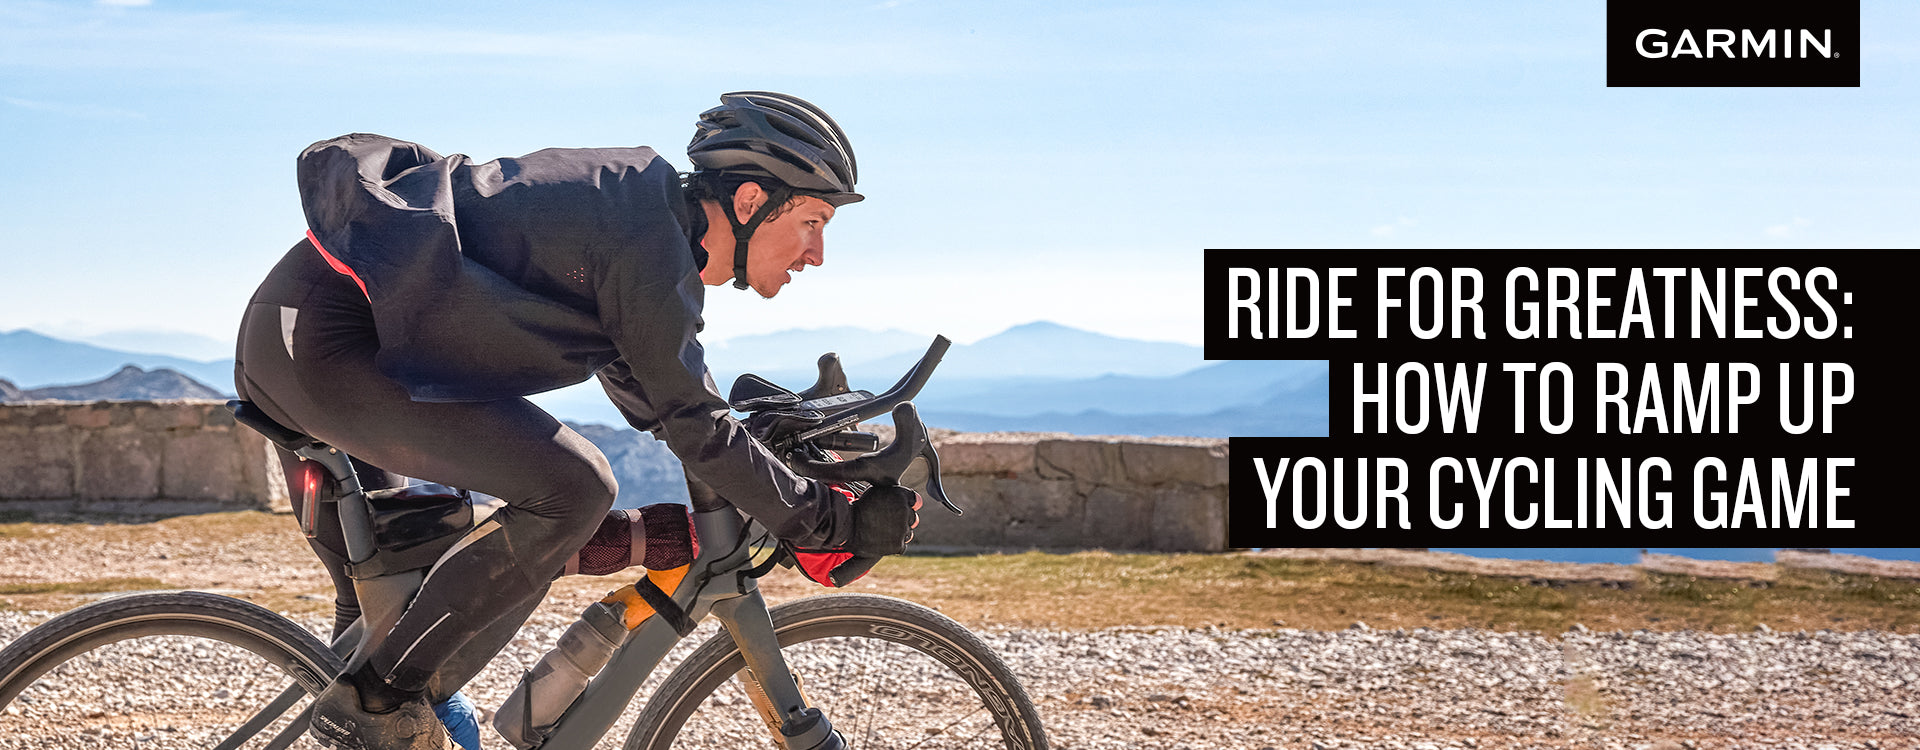 Ride for Greatness: How to Ramp Up Your Cycling Game